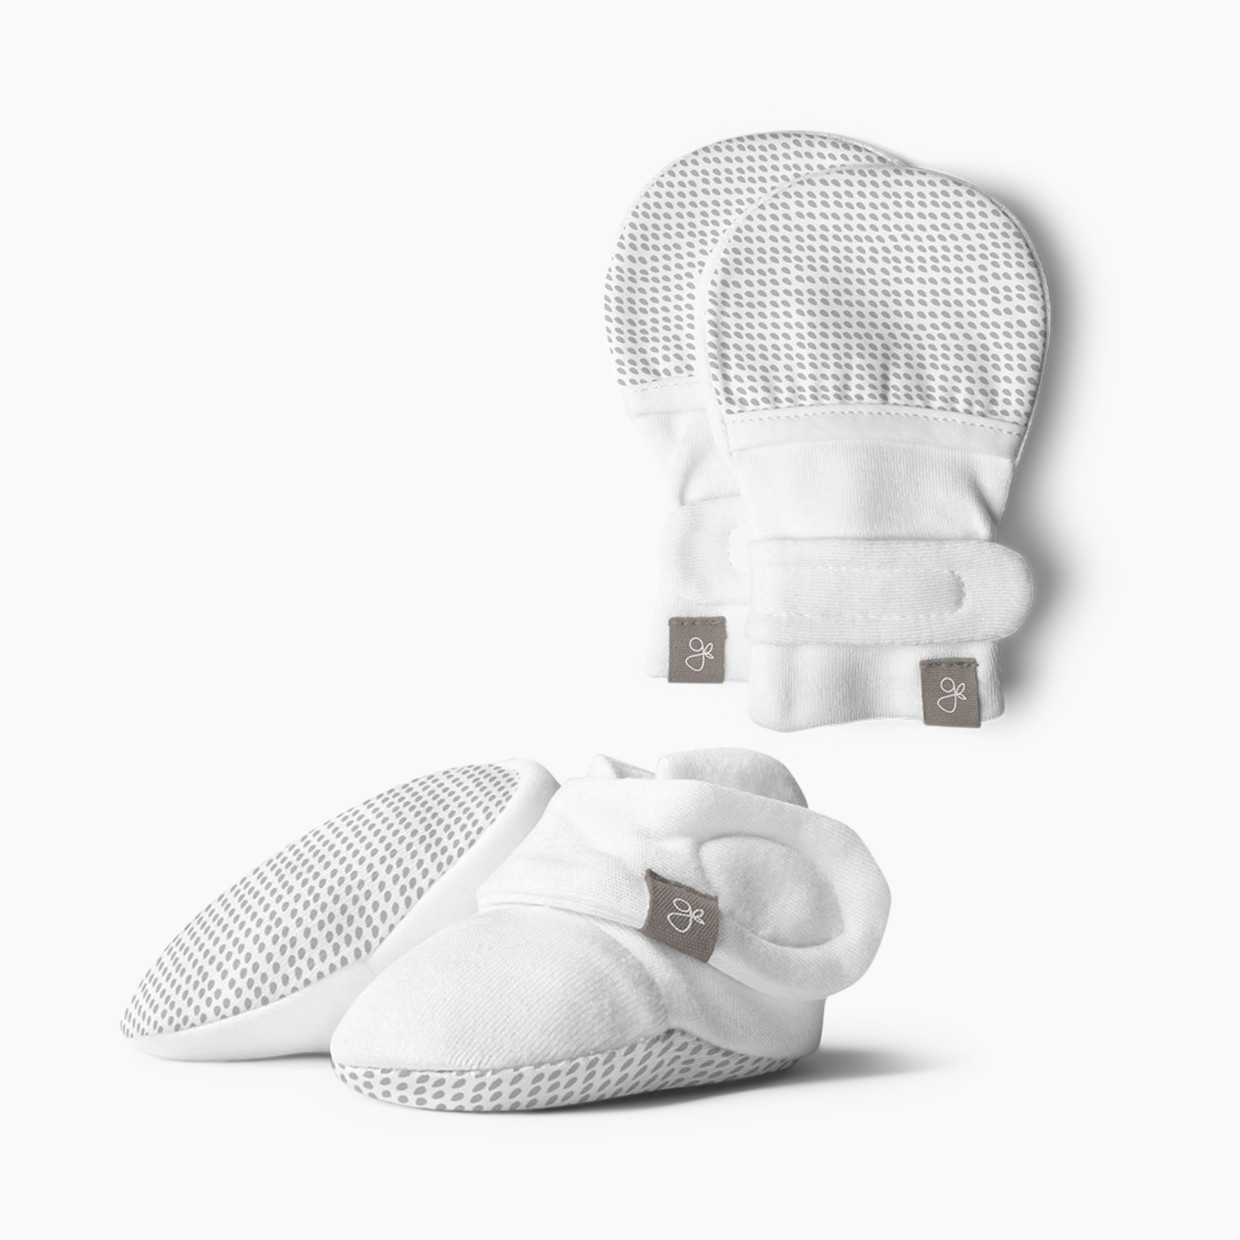 Goumi Kids Stay on Baby Mitts + Boots Bundle - Drops Gray, 0-3 Months.